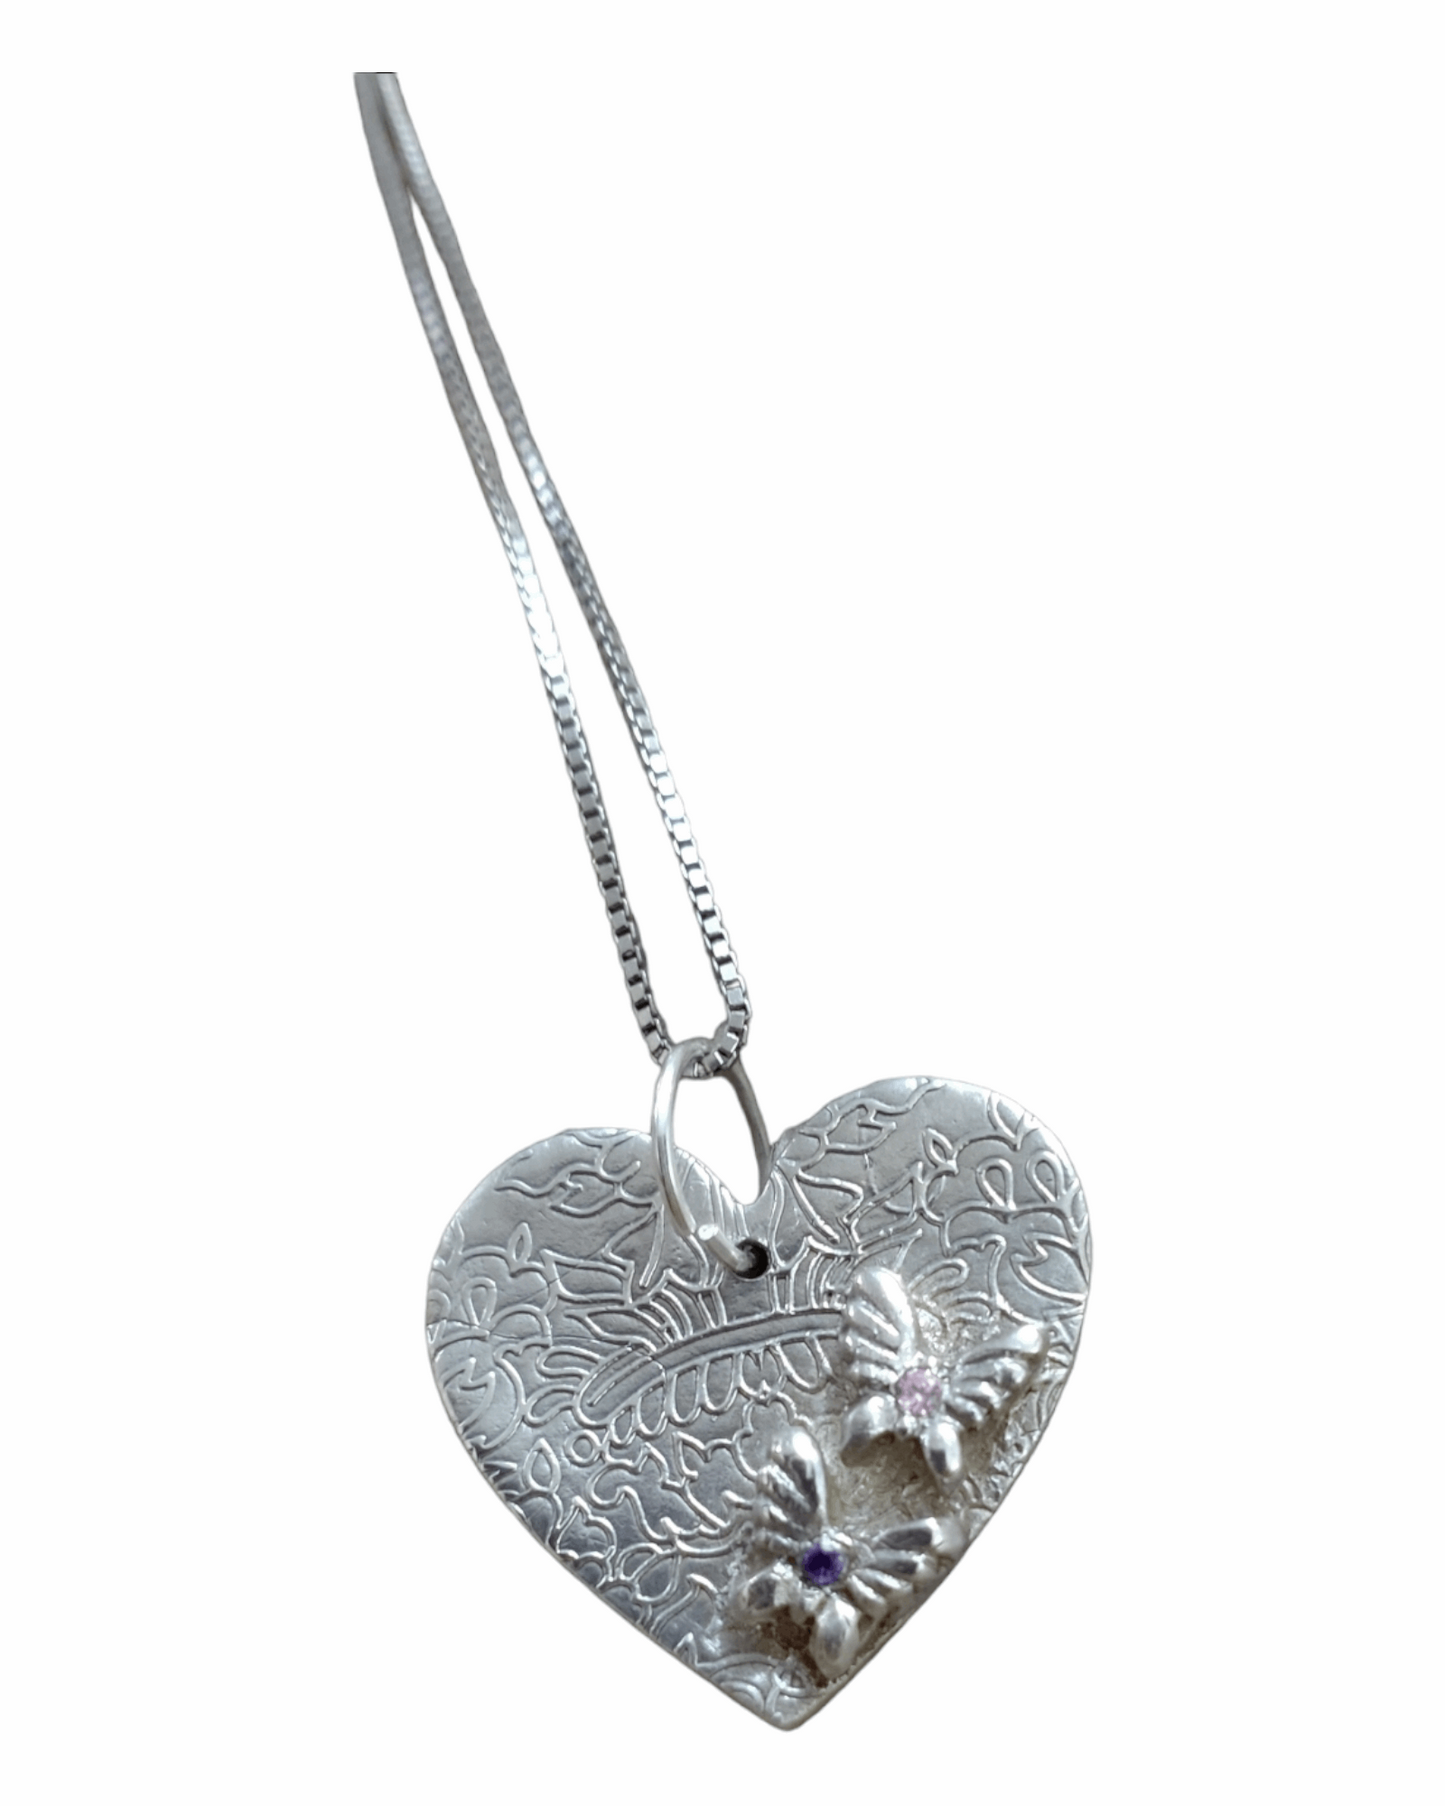 Handmade fine silver embossed heart shaped pendant with butterflies set with cubic zirconia stones 